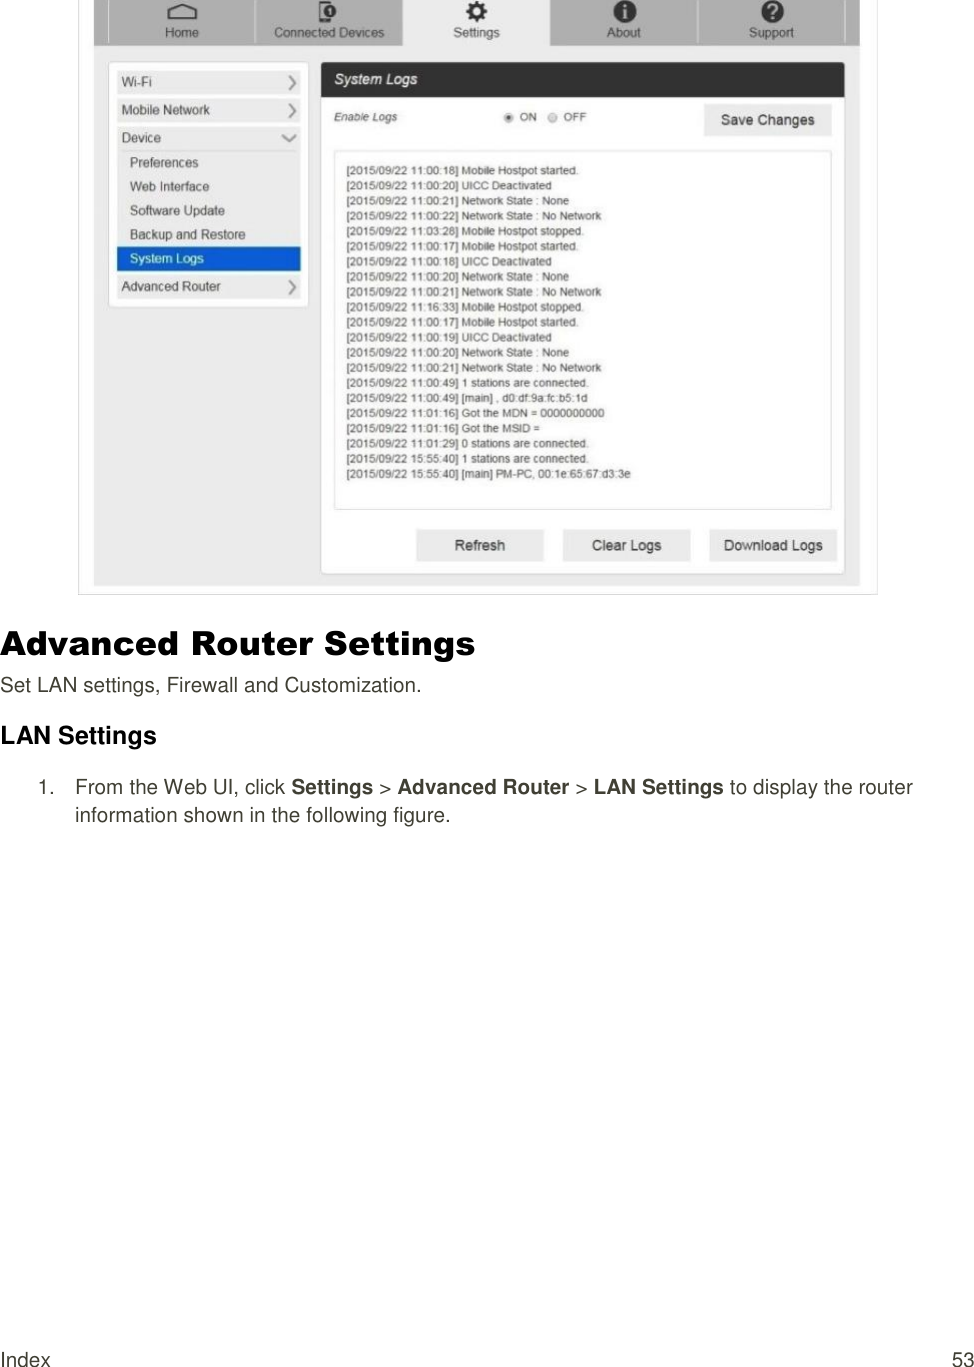 Index  53   Advanced Router Settings Set LAN settings, Firewall and Customization. LAN Settings 1.  From the Web UI, click Settings &gt; Advanced Router &gt; LAN Settings to display the router information shown in the following figure. 